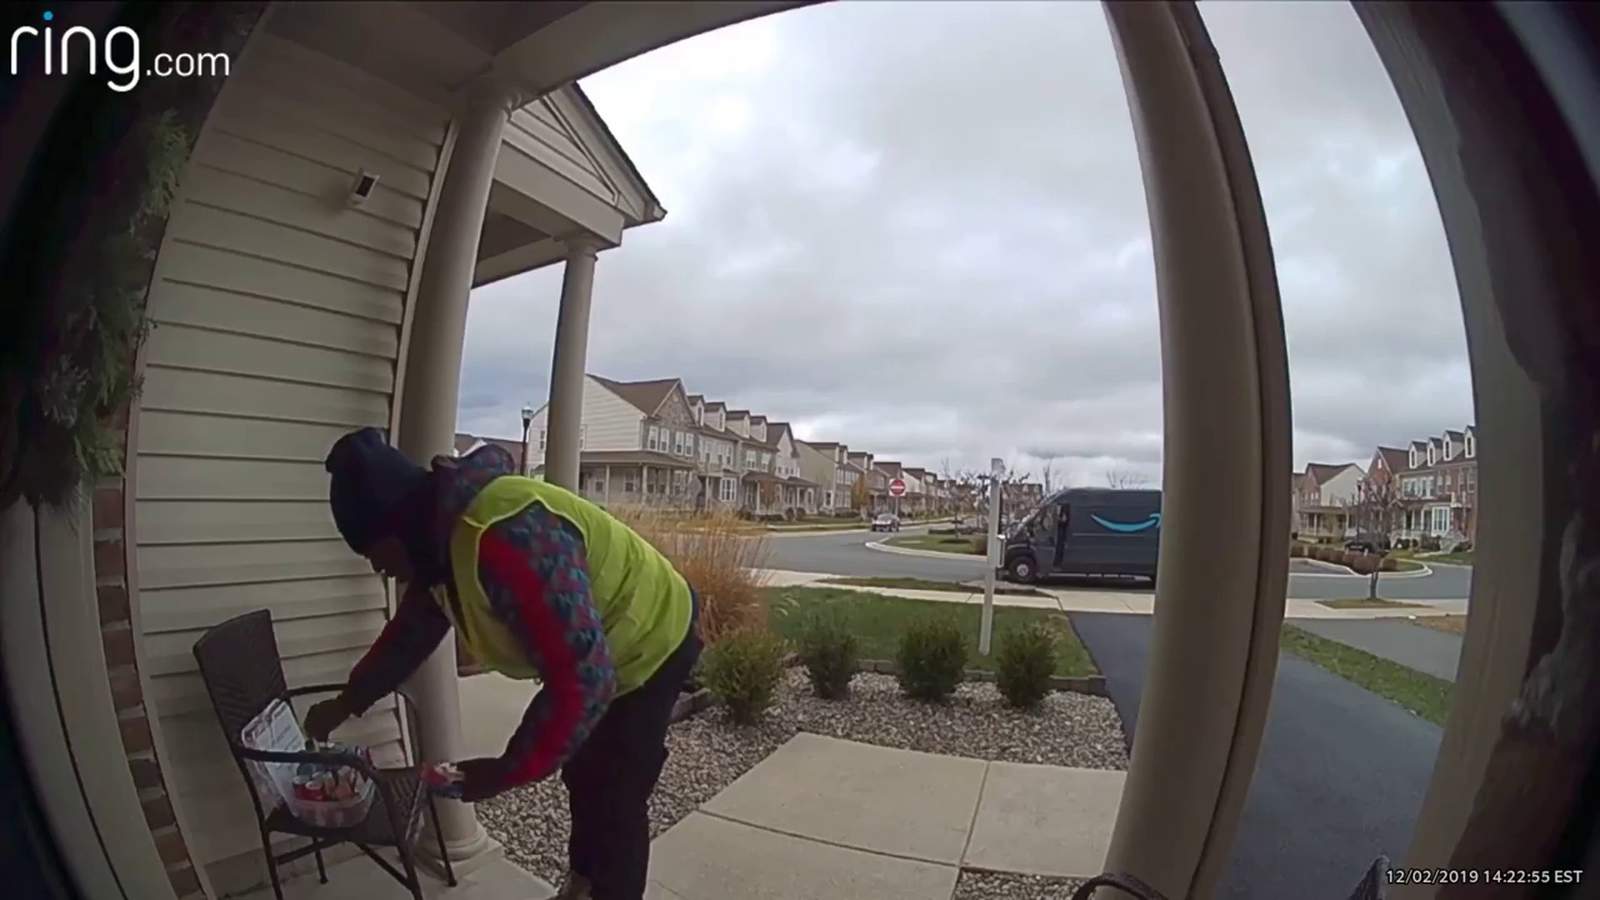 Amazon delivery driver dances with delight for basket of treats at door, video goes viral